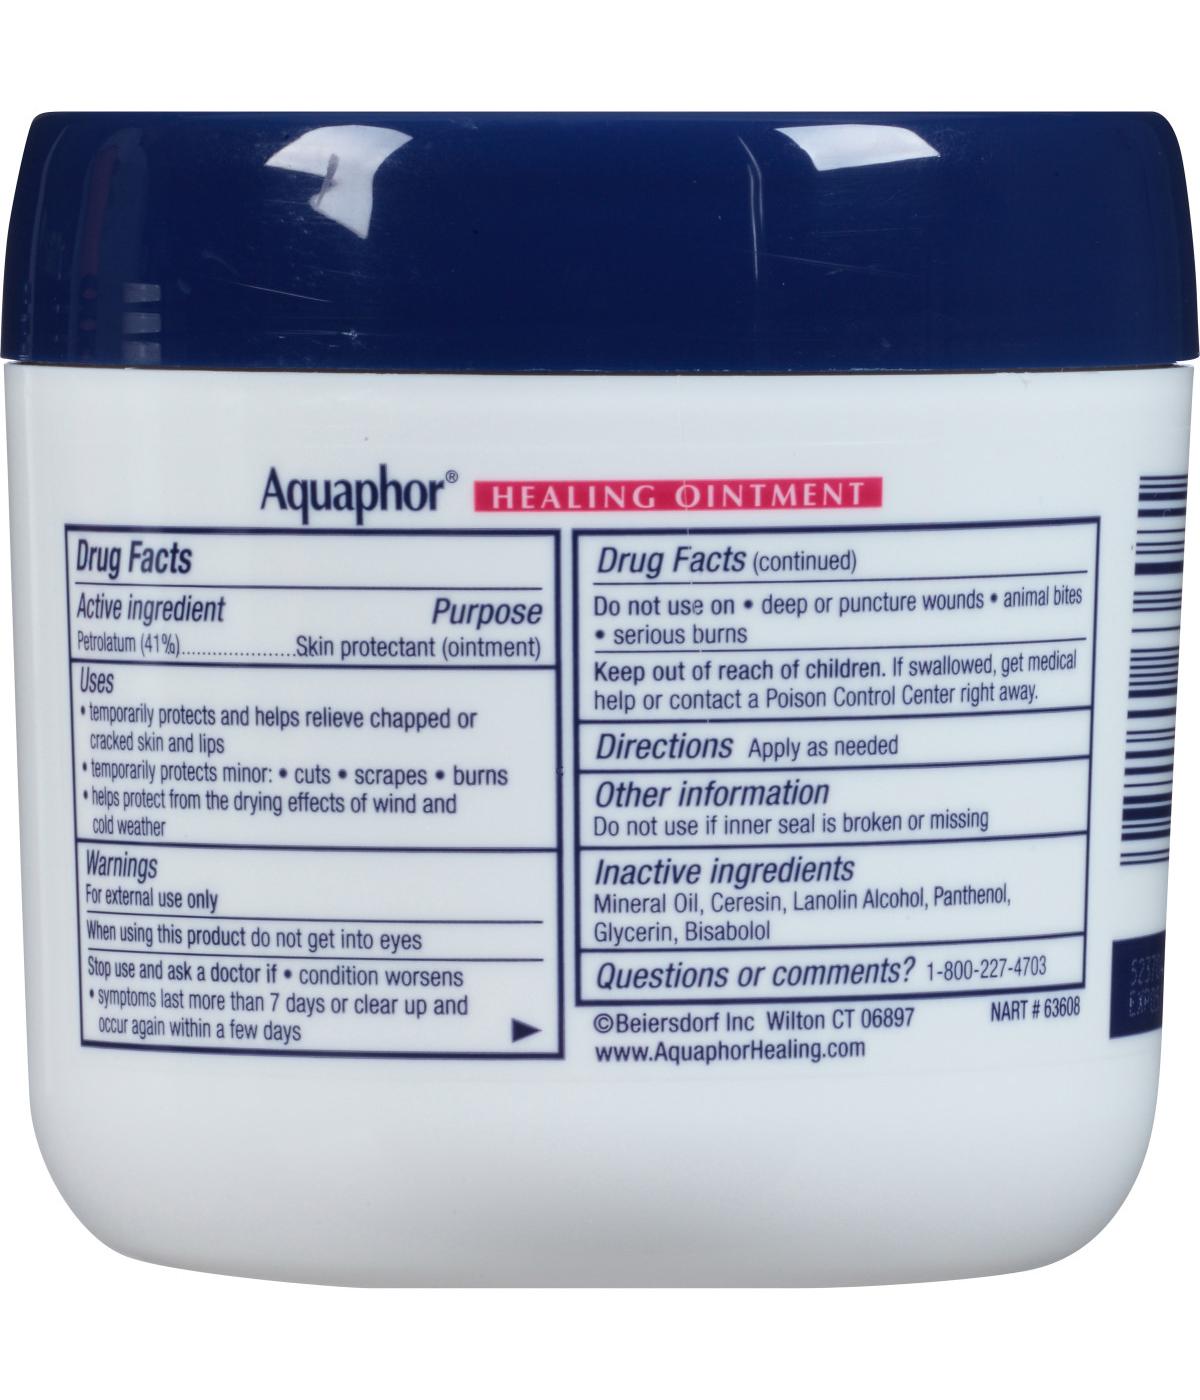 Aquaphor Advanced Therapy Healing Ointment Skin Protectant Jar; image 3 of 3